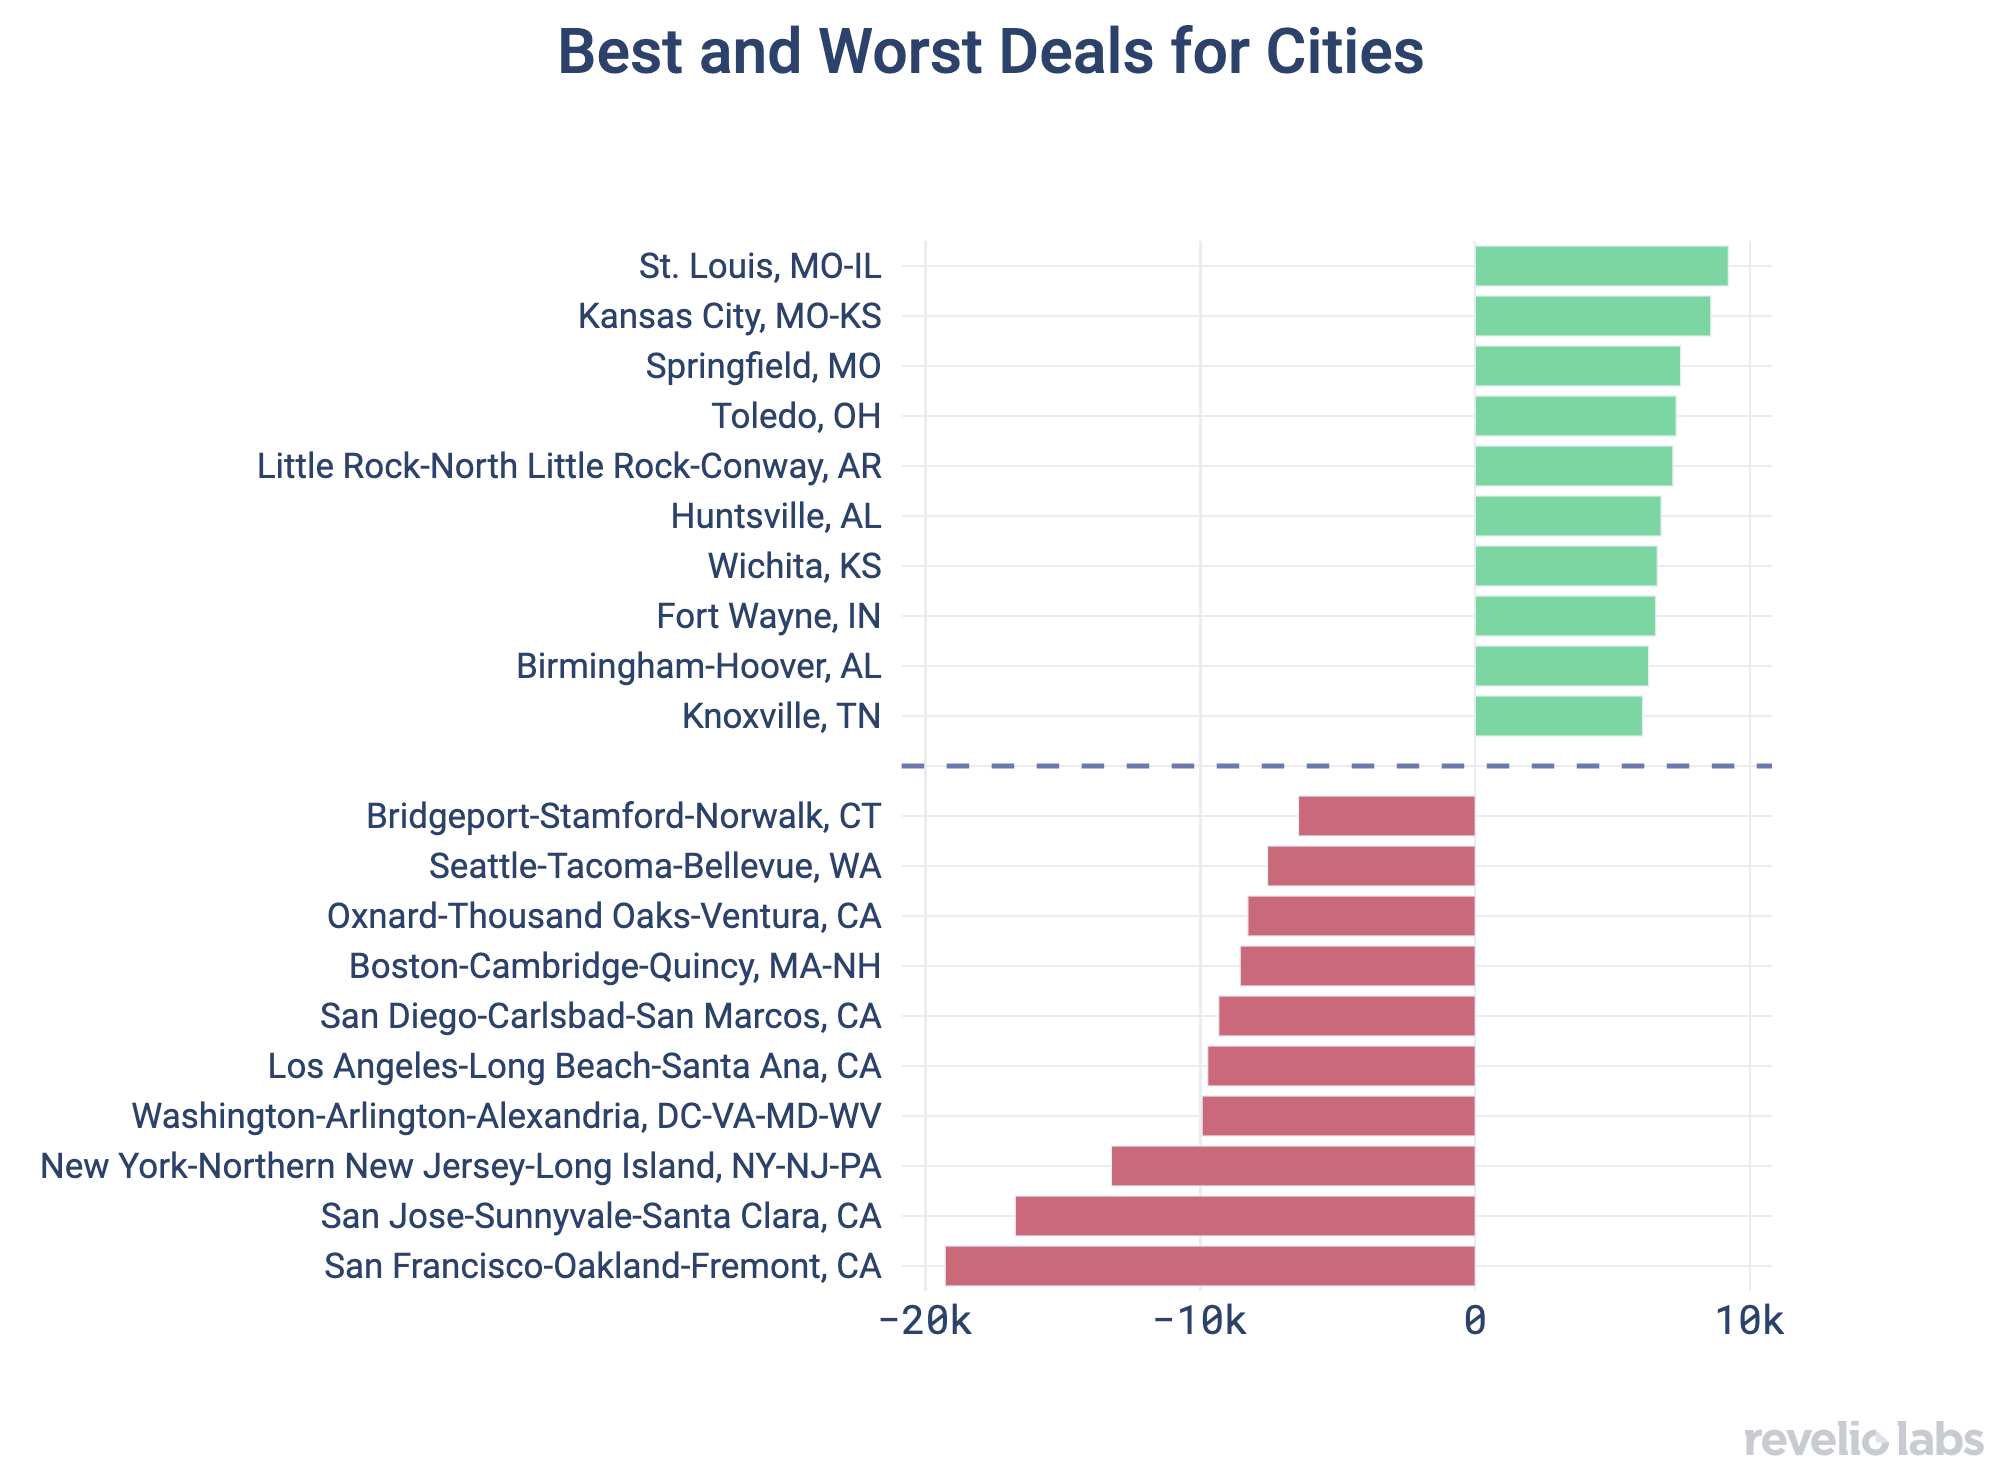 Best and worst deals for cities